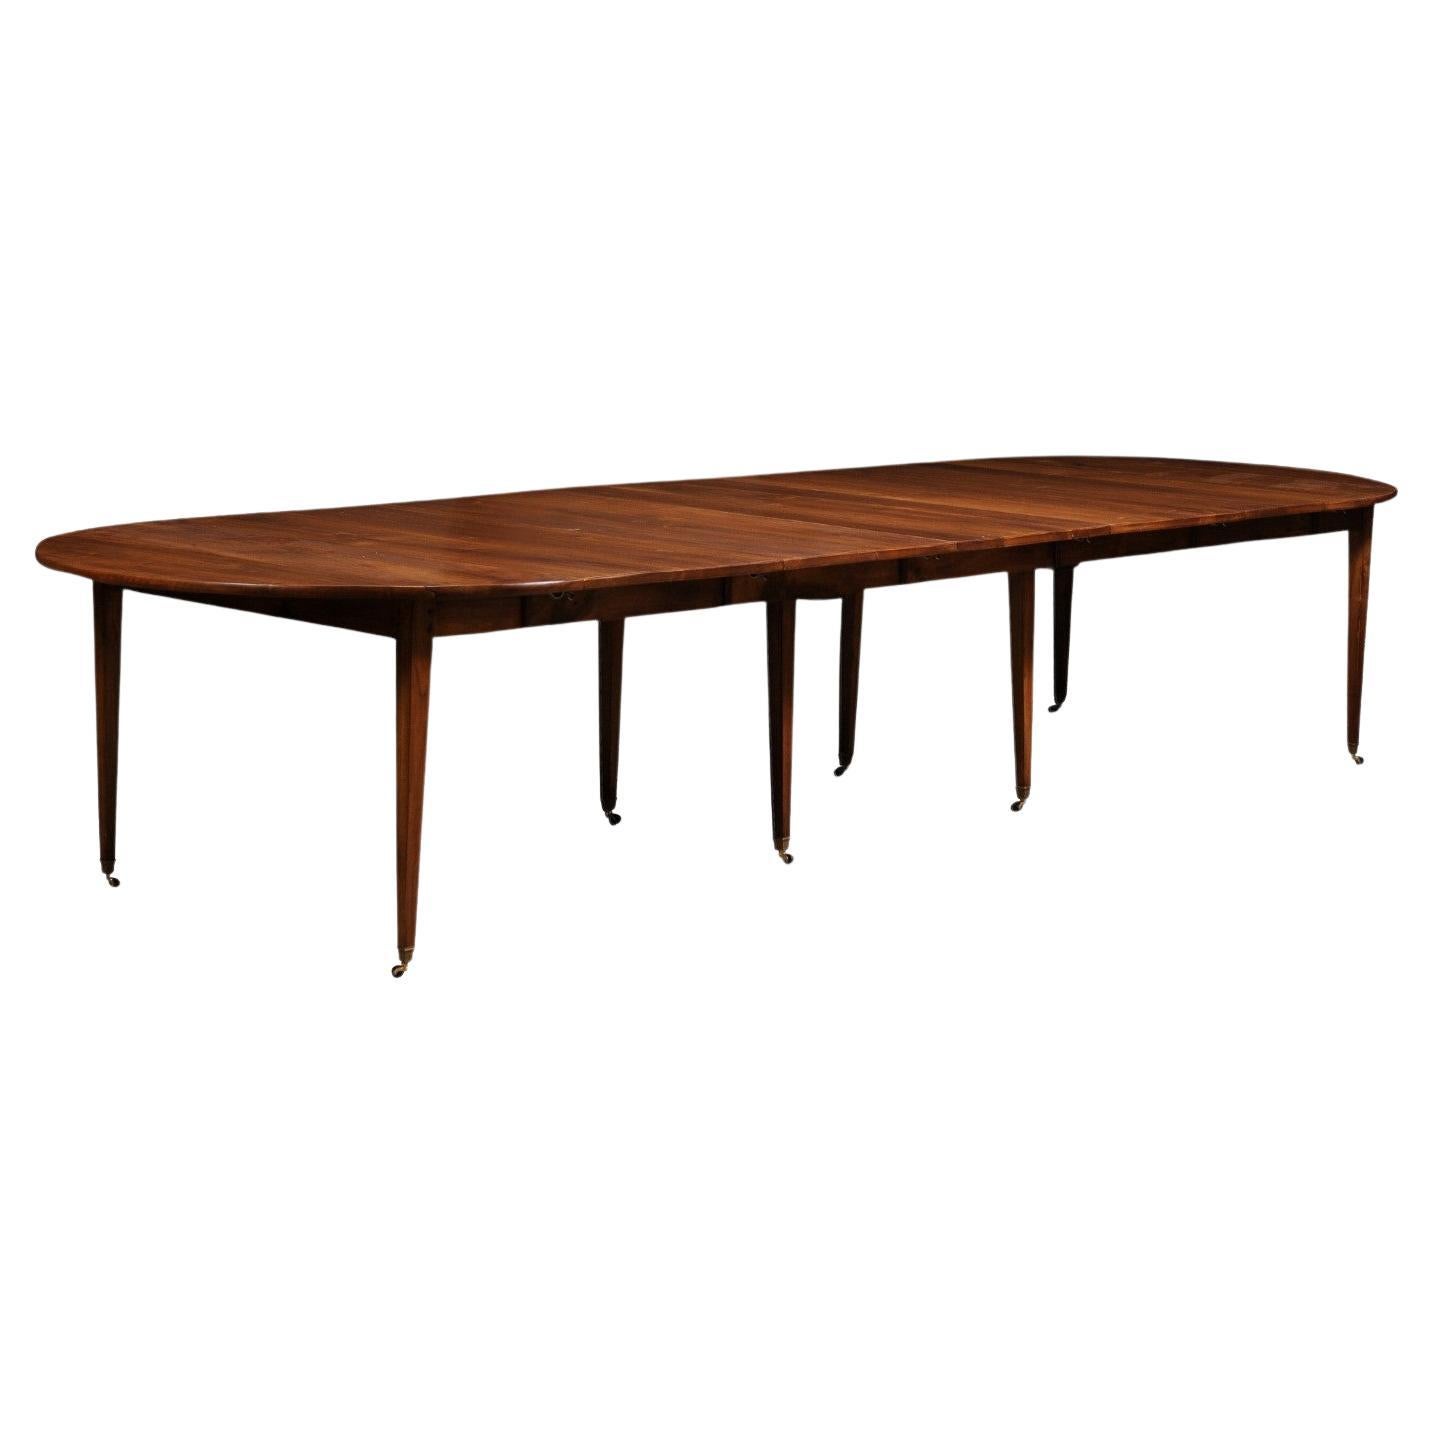 French Turn of the Century 1900s Walnut Extension Dining Table With Five Leaves For Sale